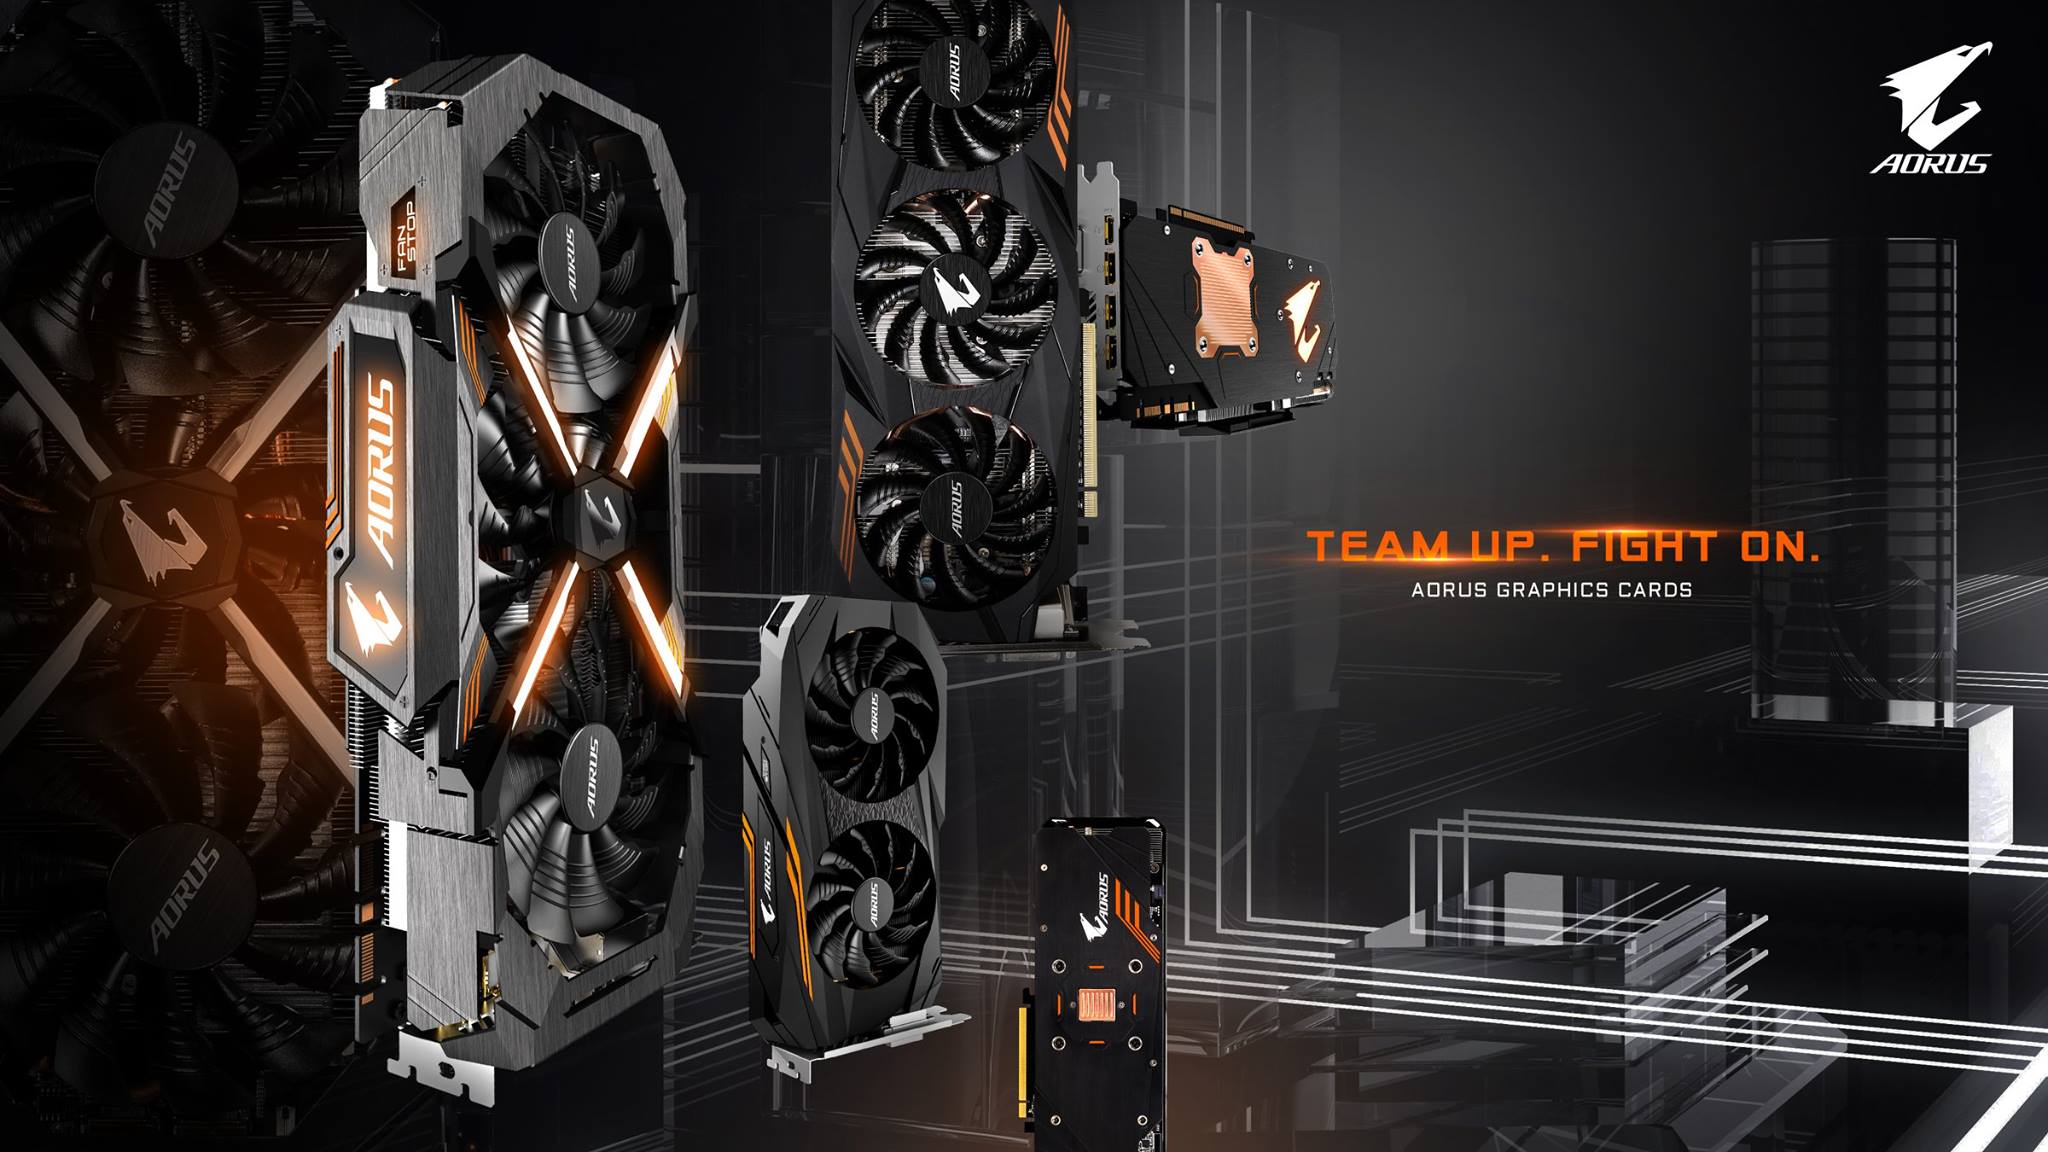 Full Aorus Graphics Card Lineup Unveiled